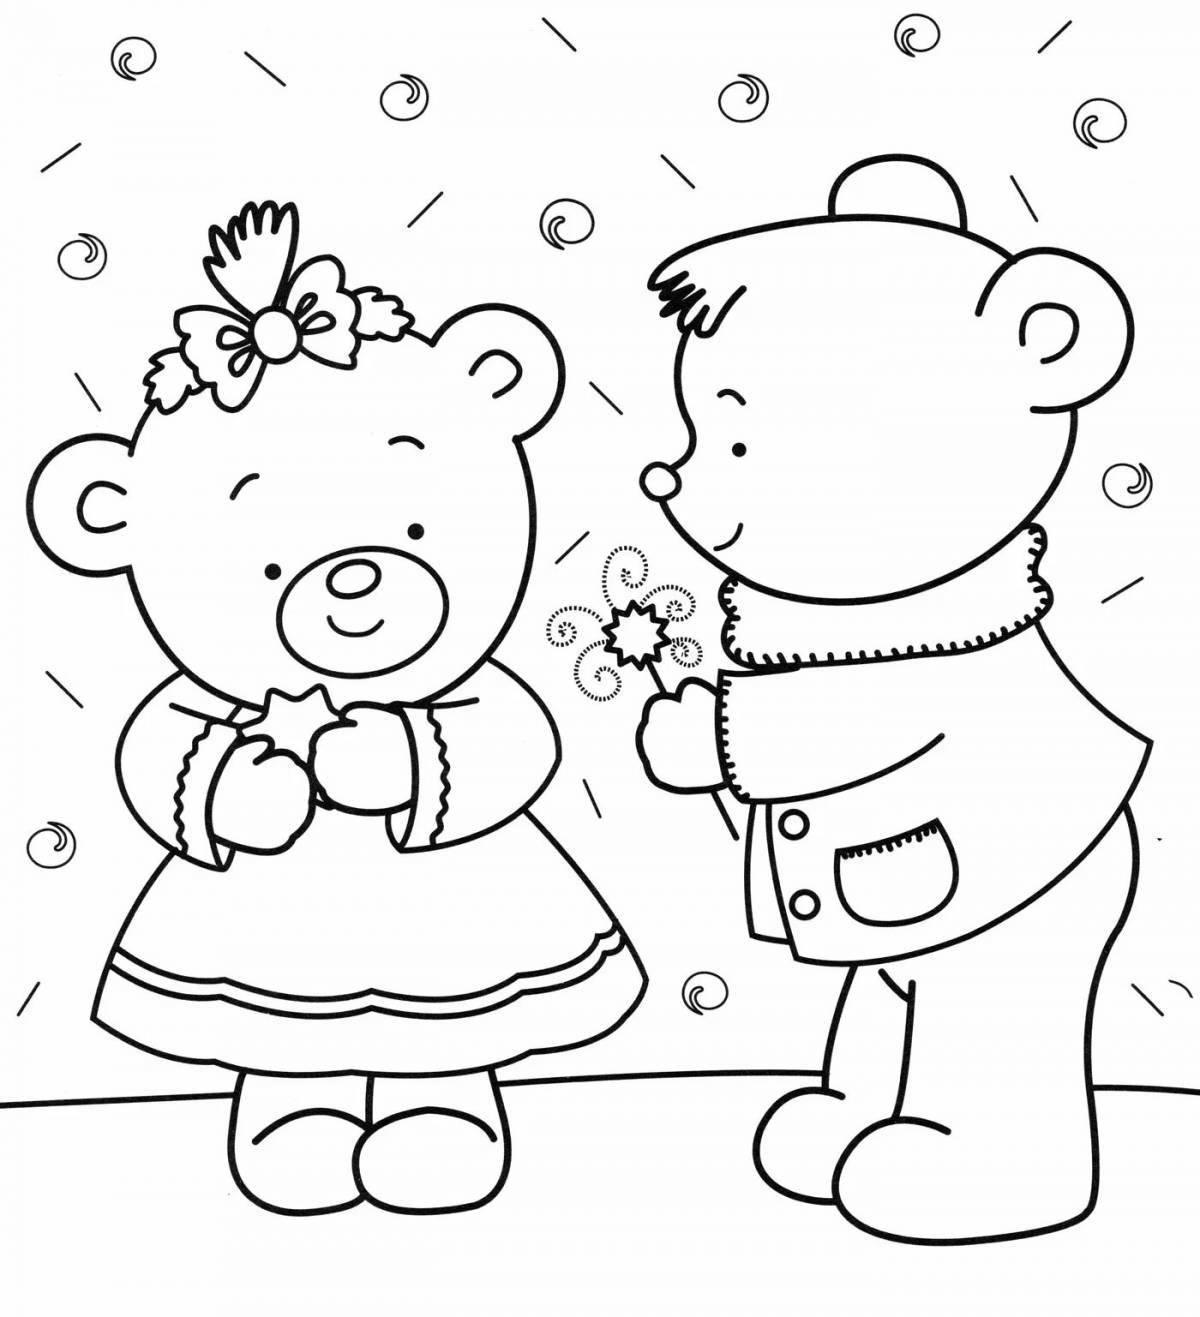 Coloring page cozy teddy bear in baby pants